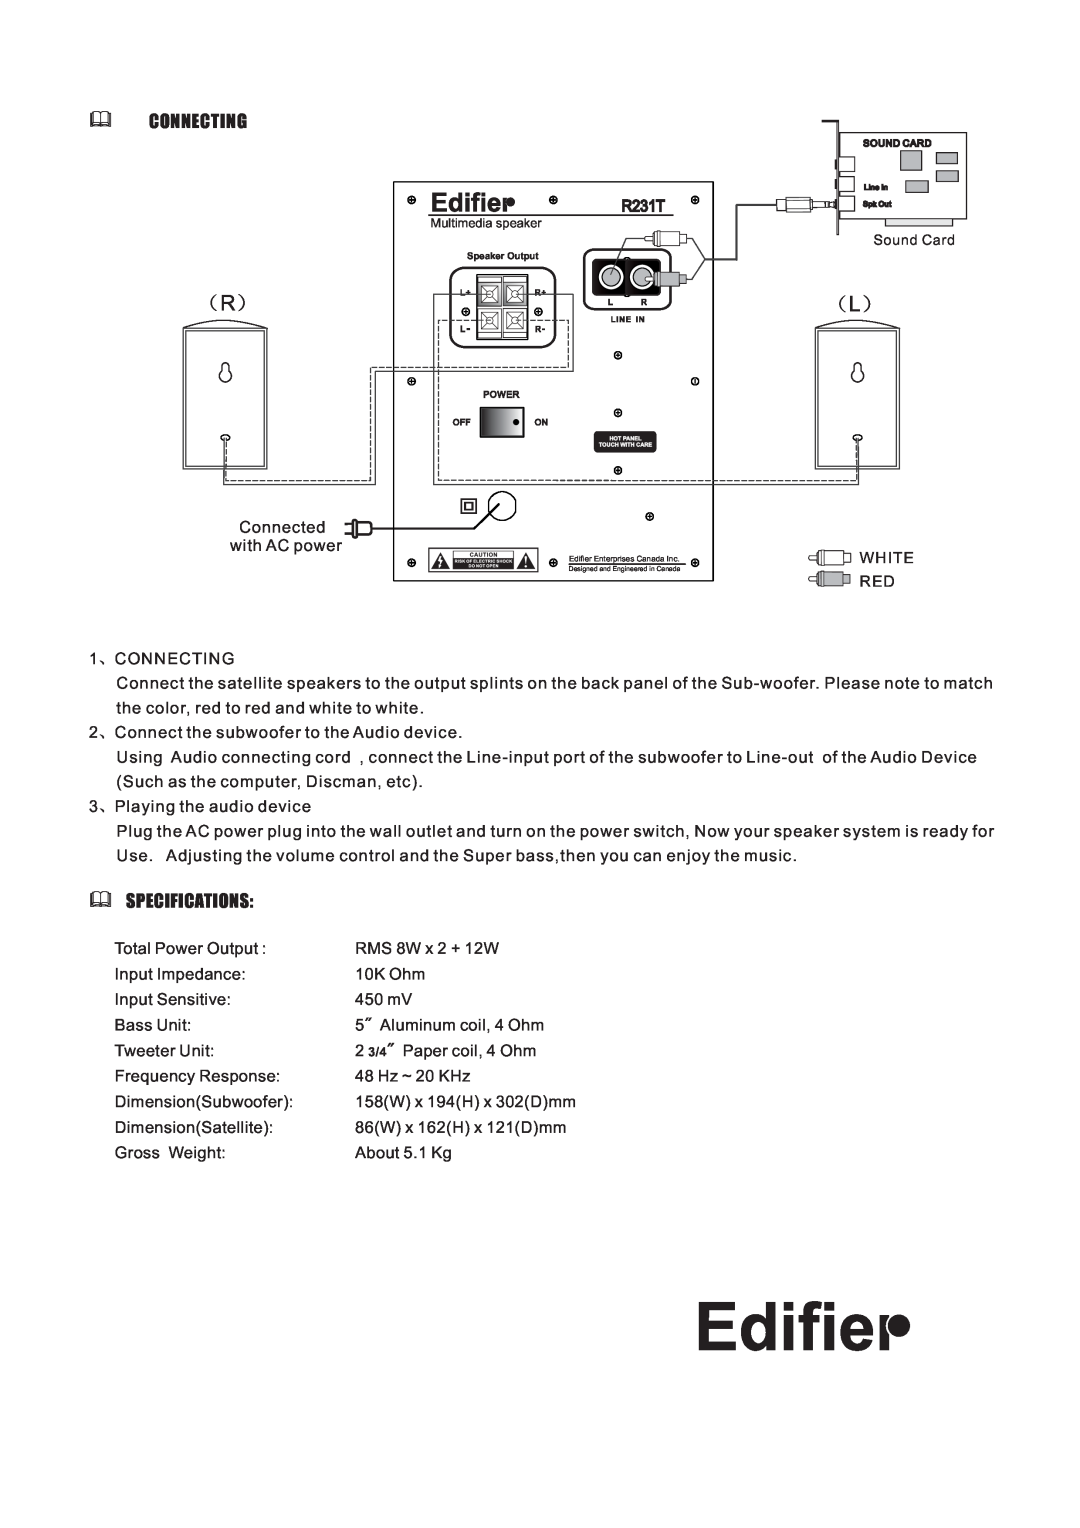 Edifier Enterprises Canada R231T user manual Connecting, Specifications 